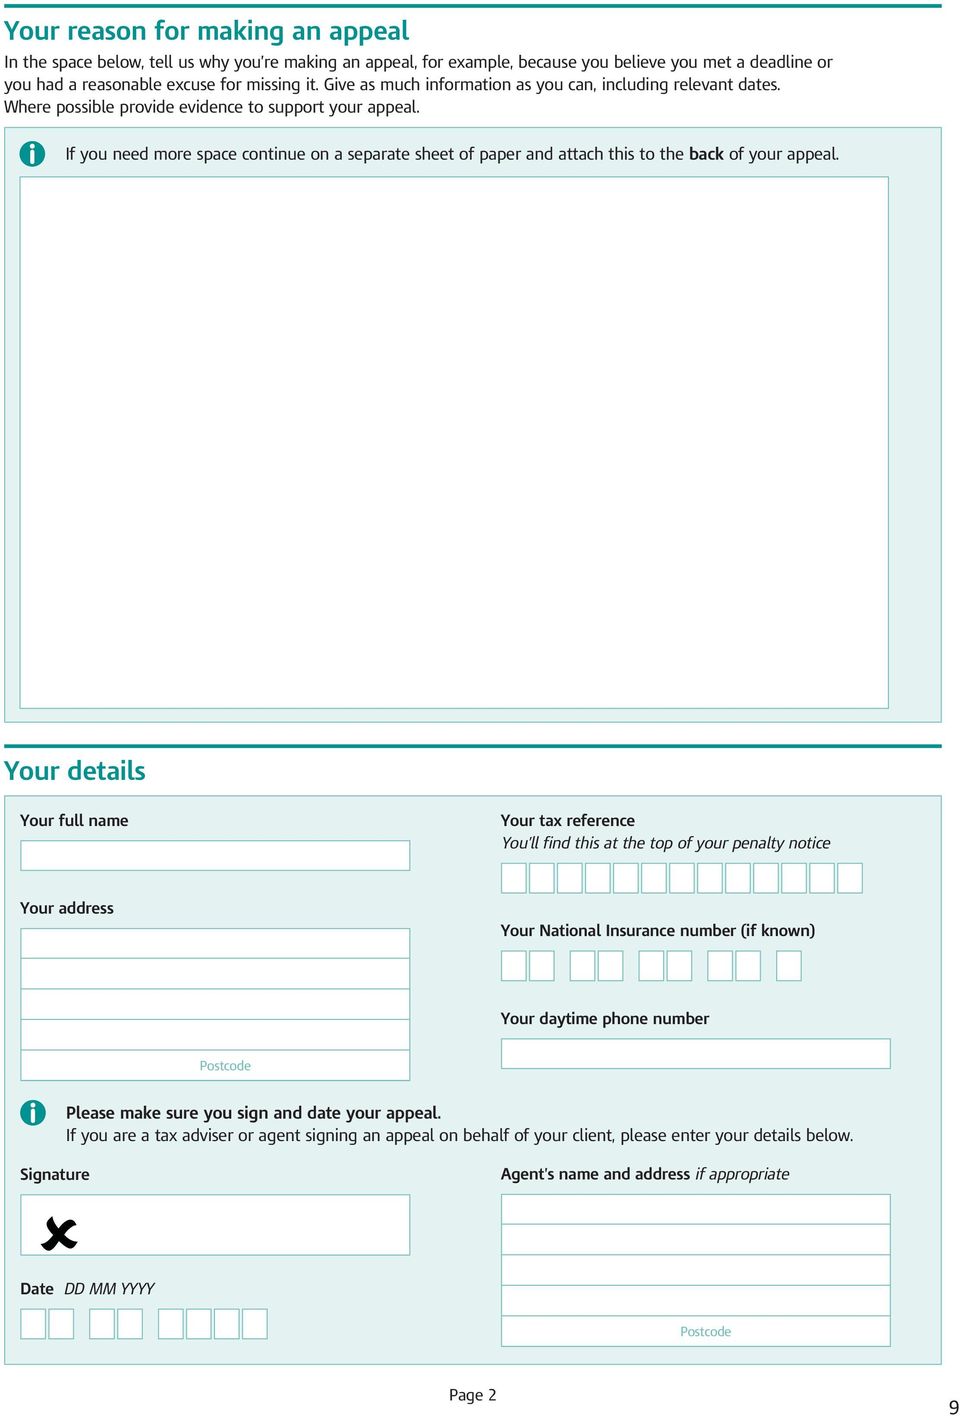 If you need more space continue on a separate sheet of paper and attach this to the back of your appeal.